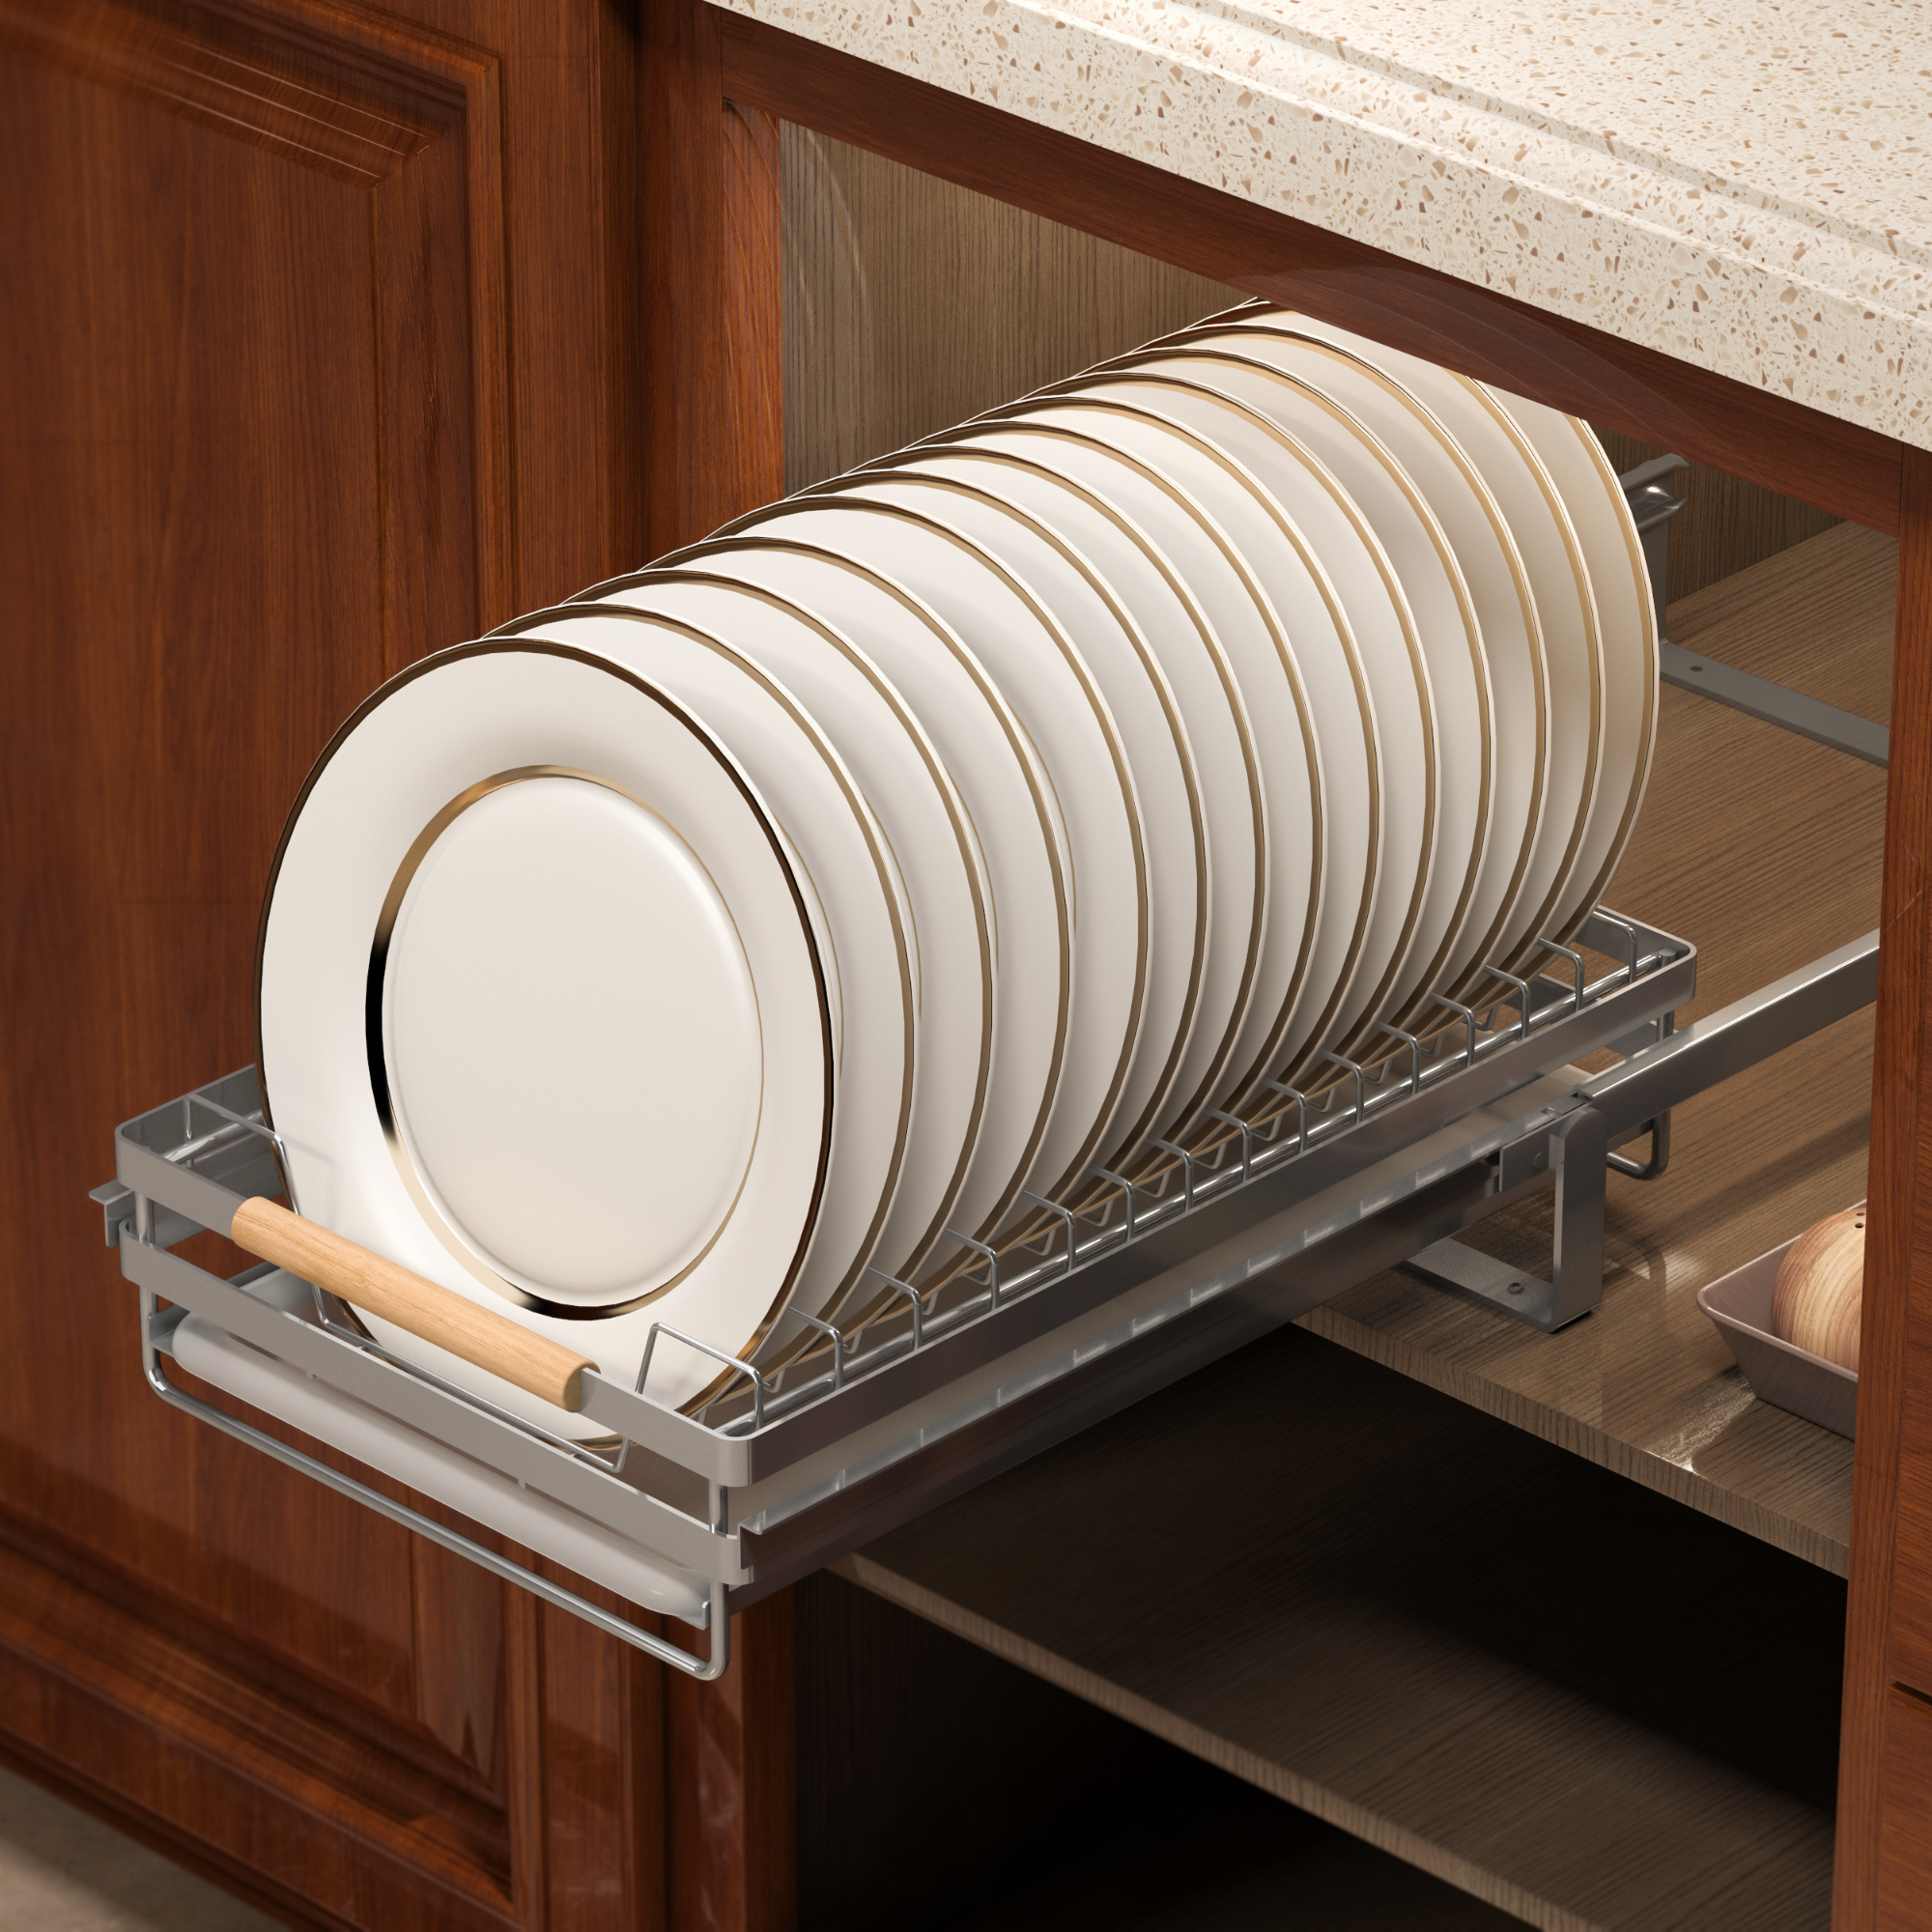 Simple pull out dish rack